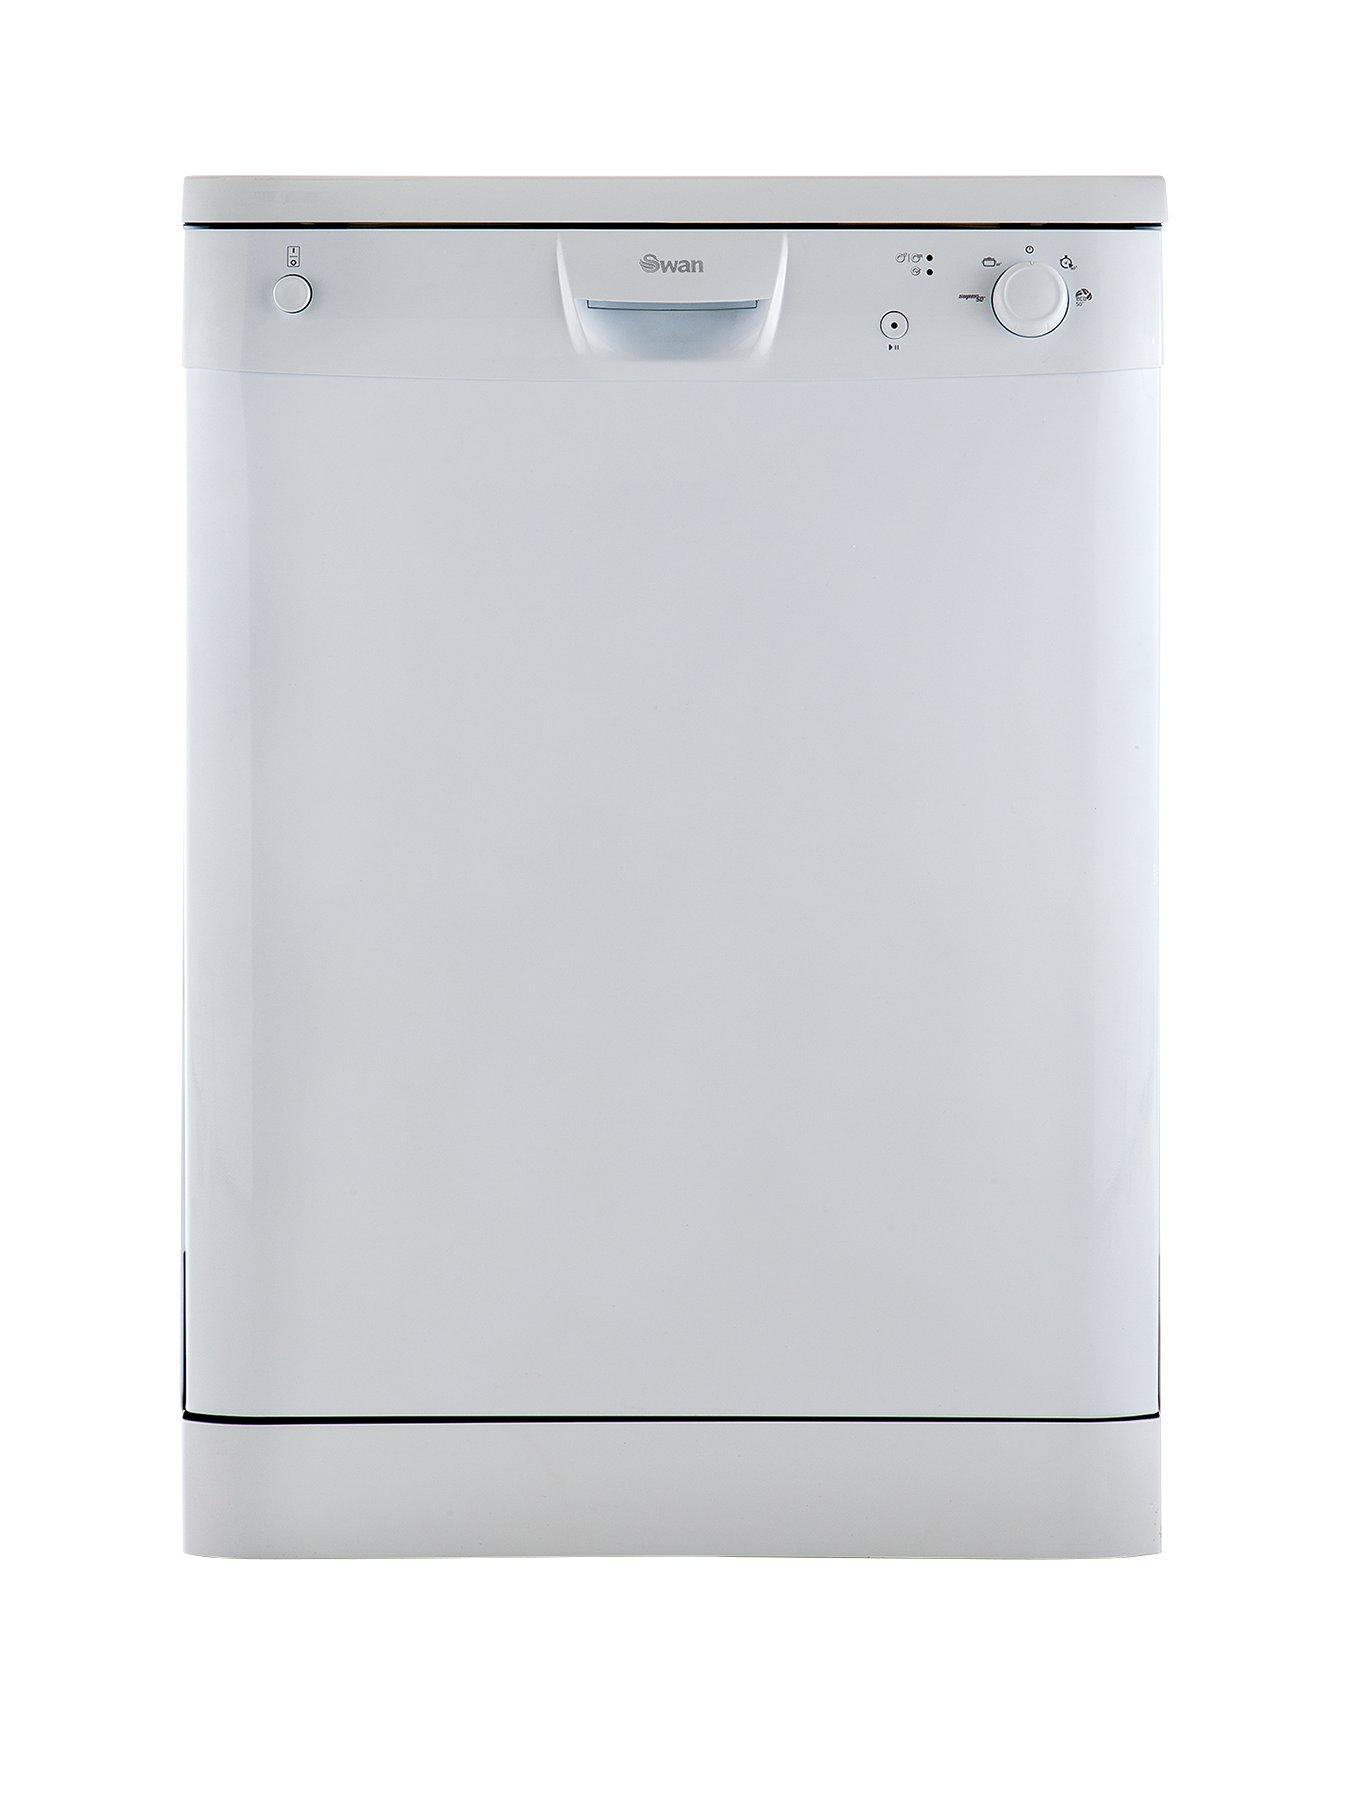 Dishwashers From Leading Brands | Very 